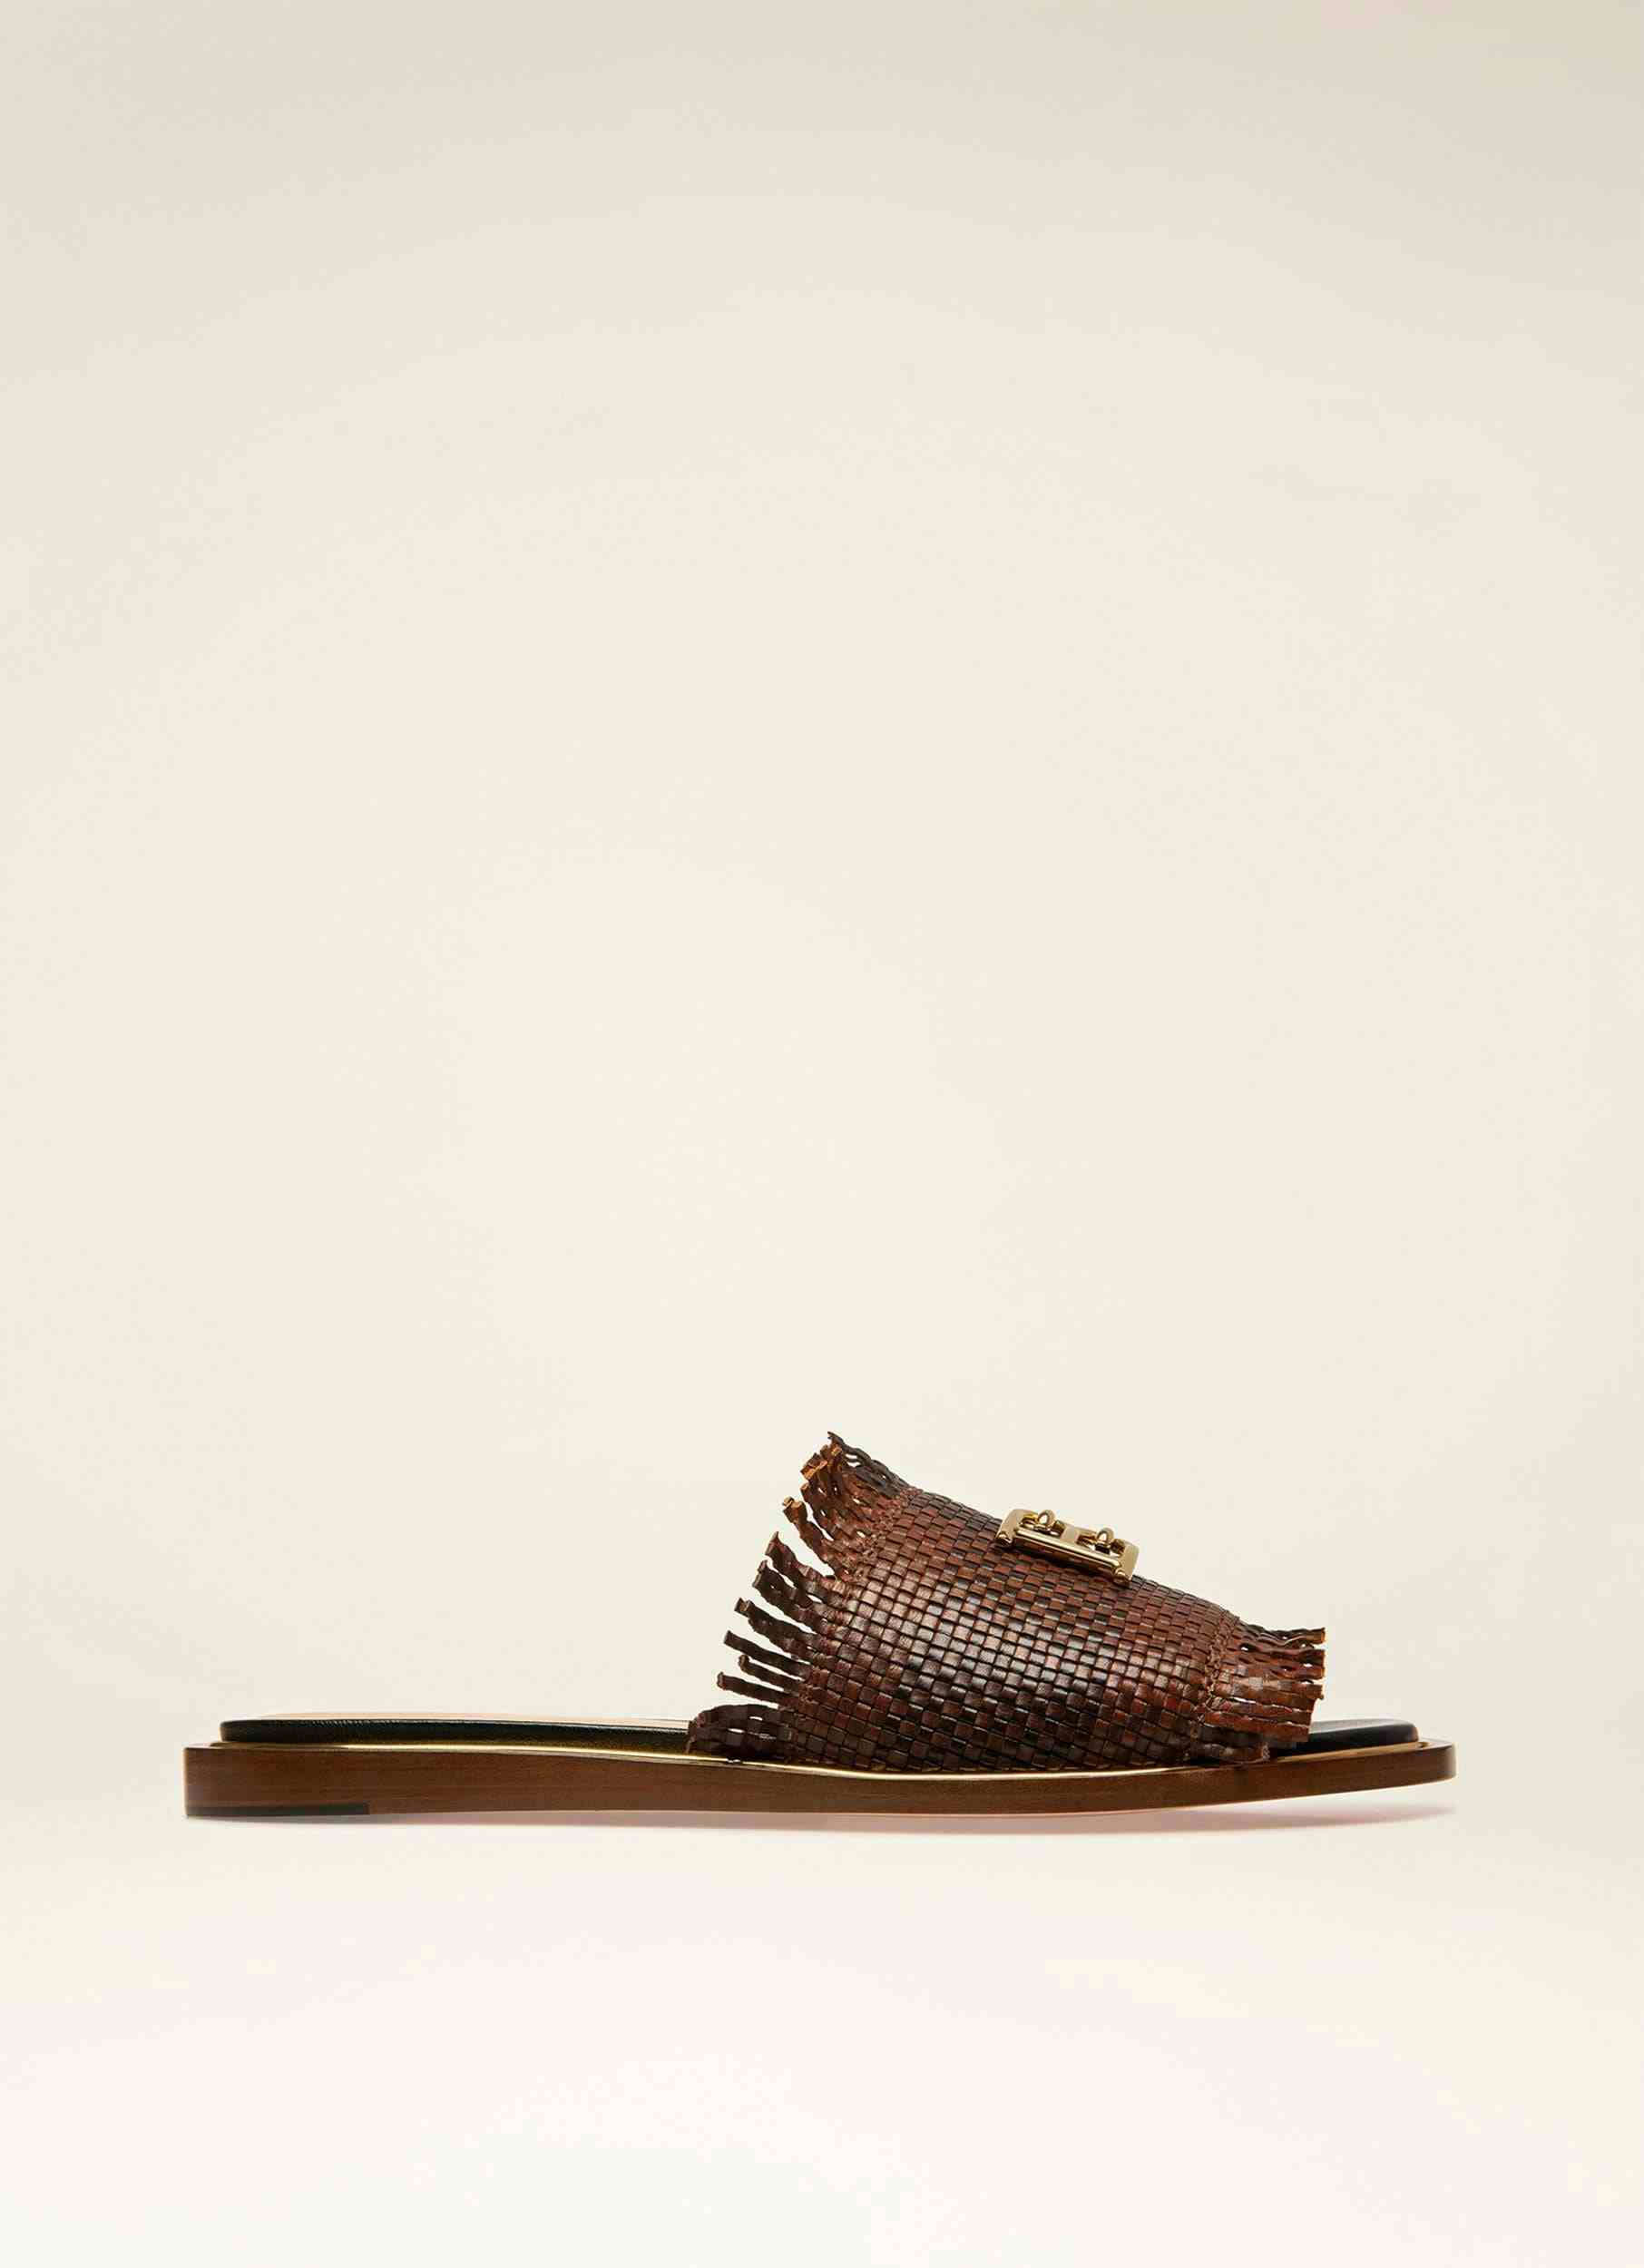 B CHAIN Leather Slides In Brown & Black - Women's - Bally